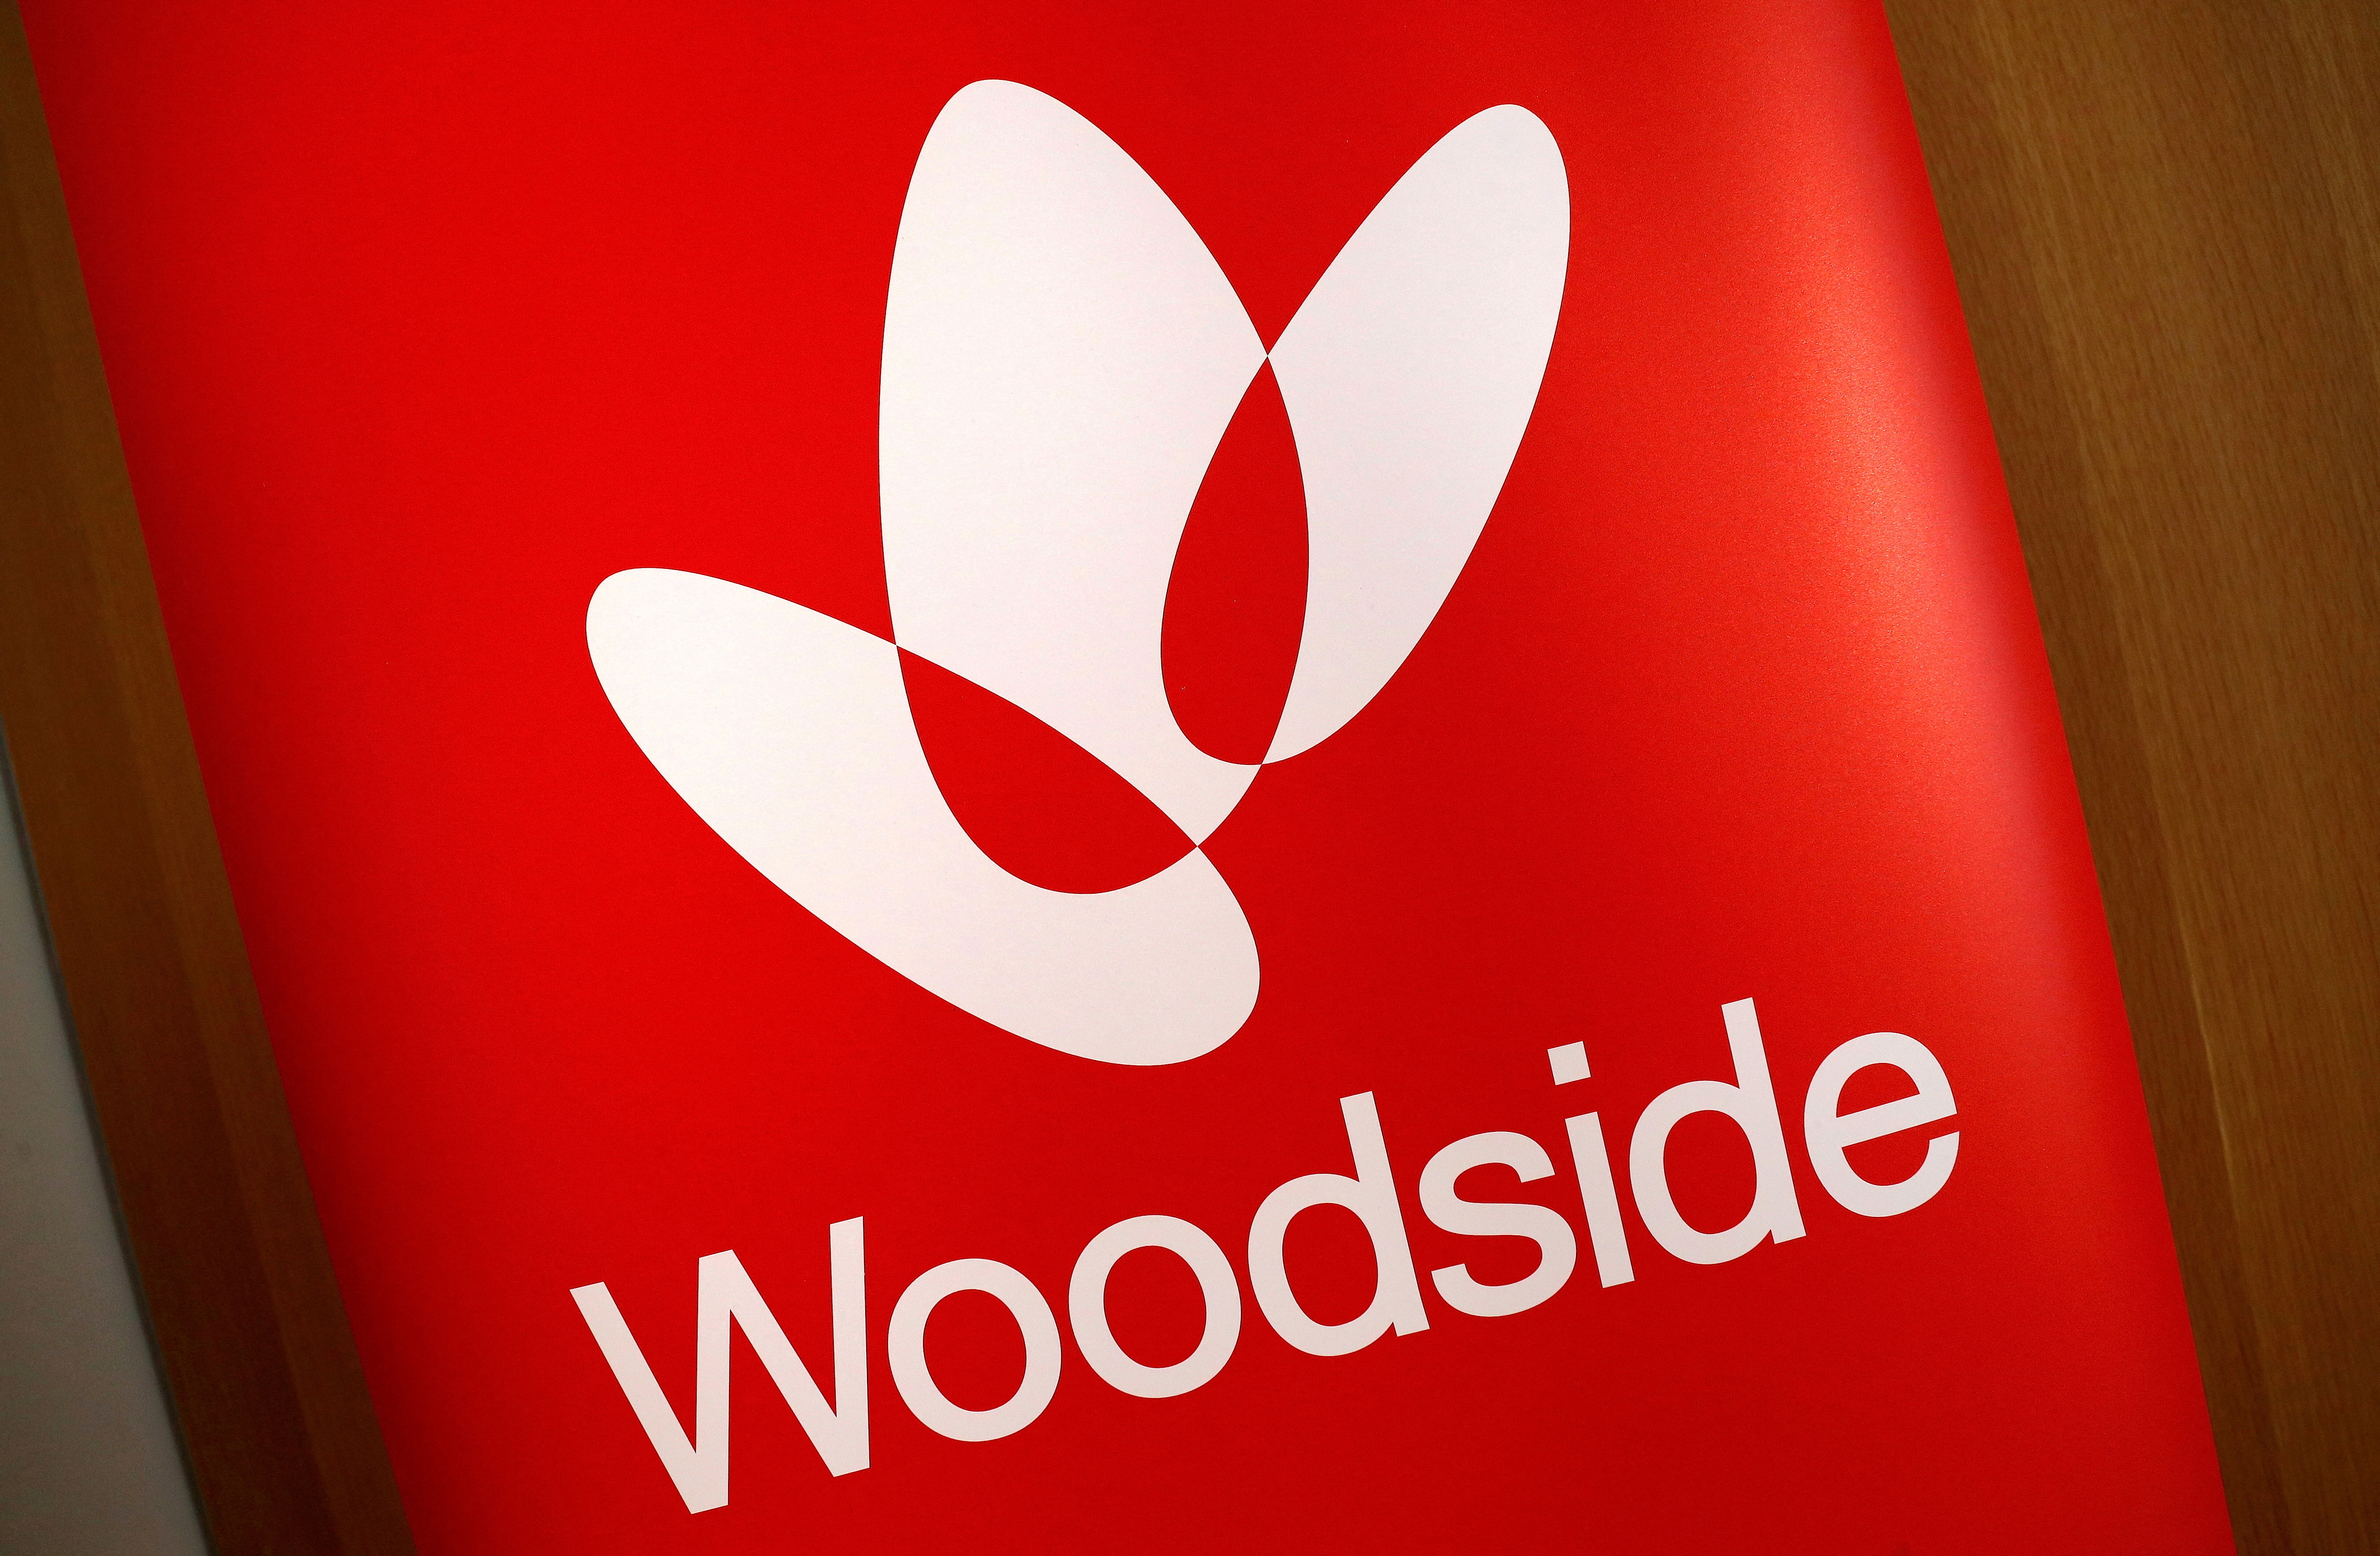 The logo for Woodside Petroleum, Australia's top independent oil and gas company